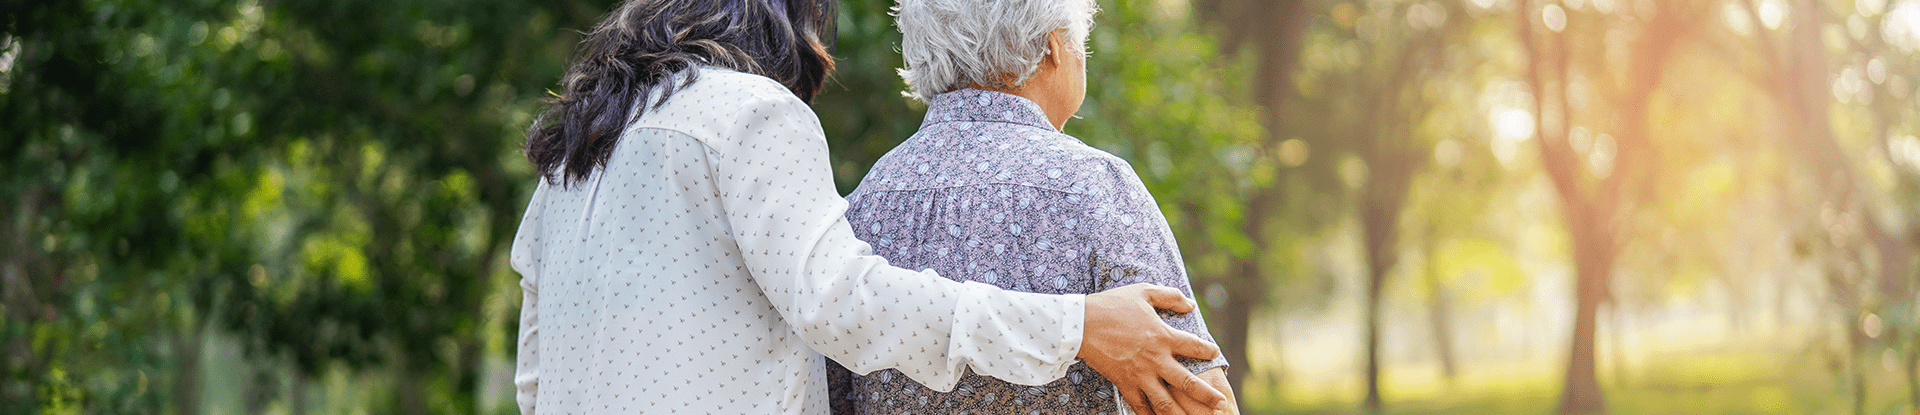  Aged care sector receives welcomes boost